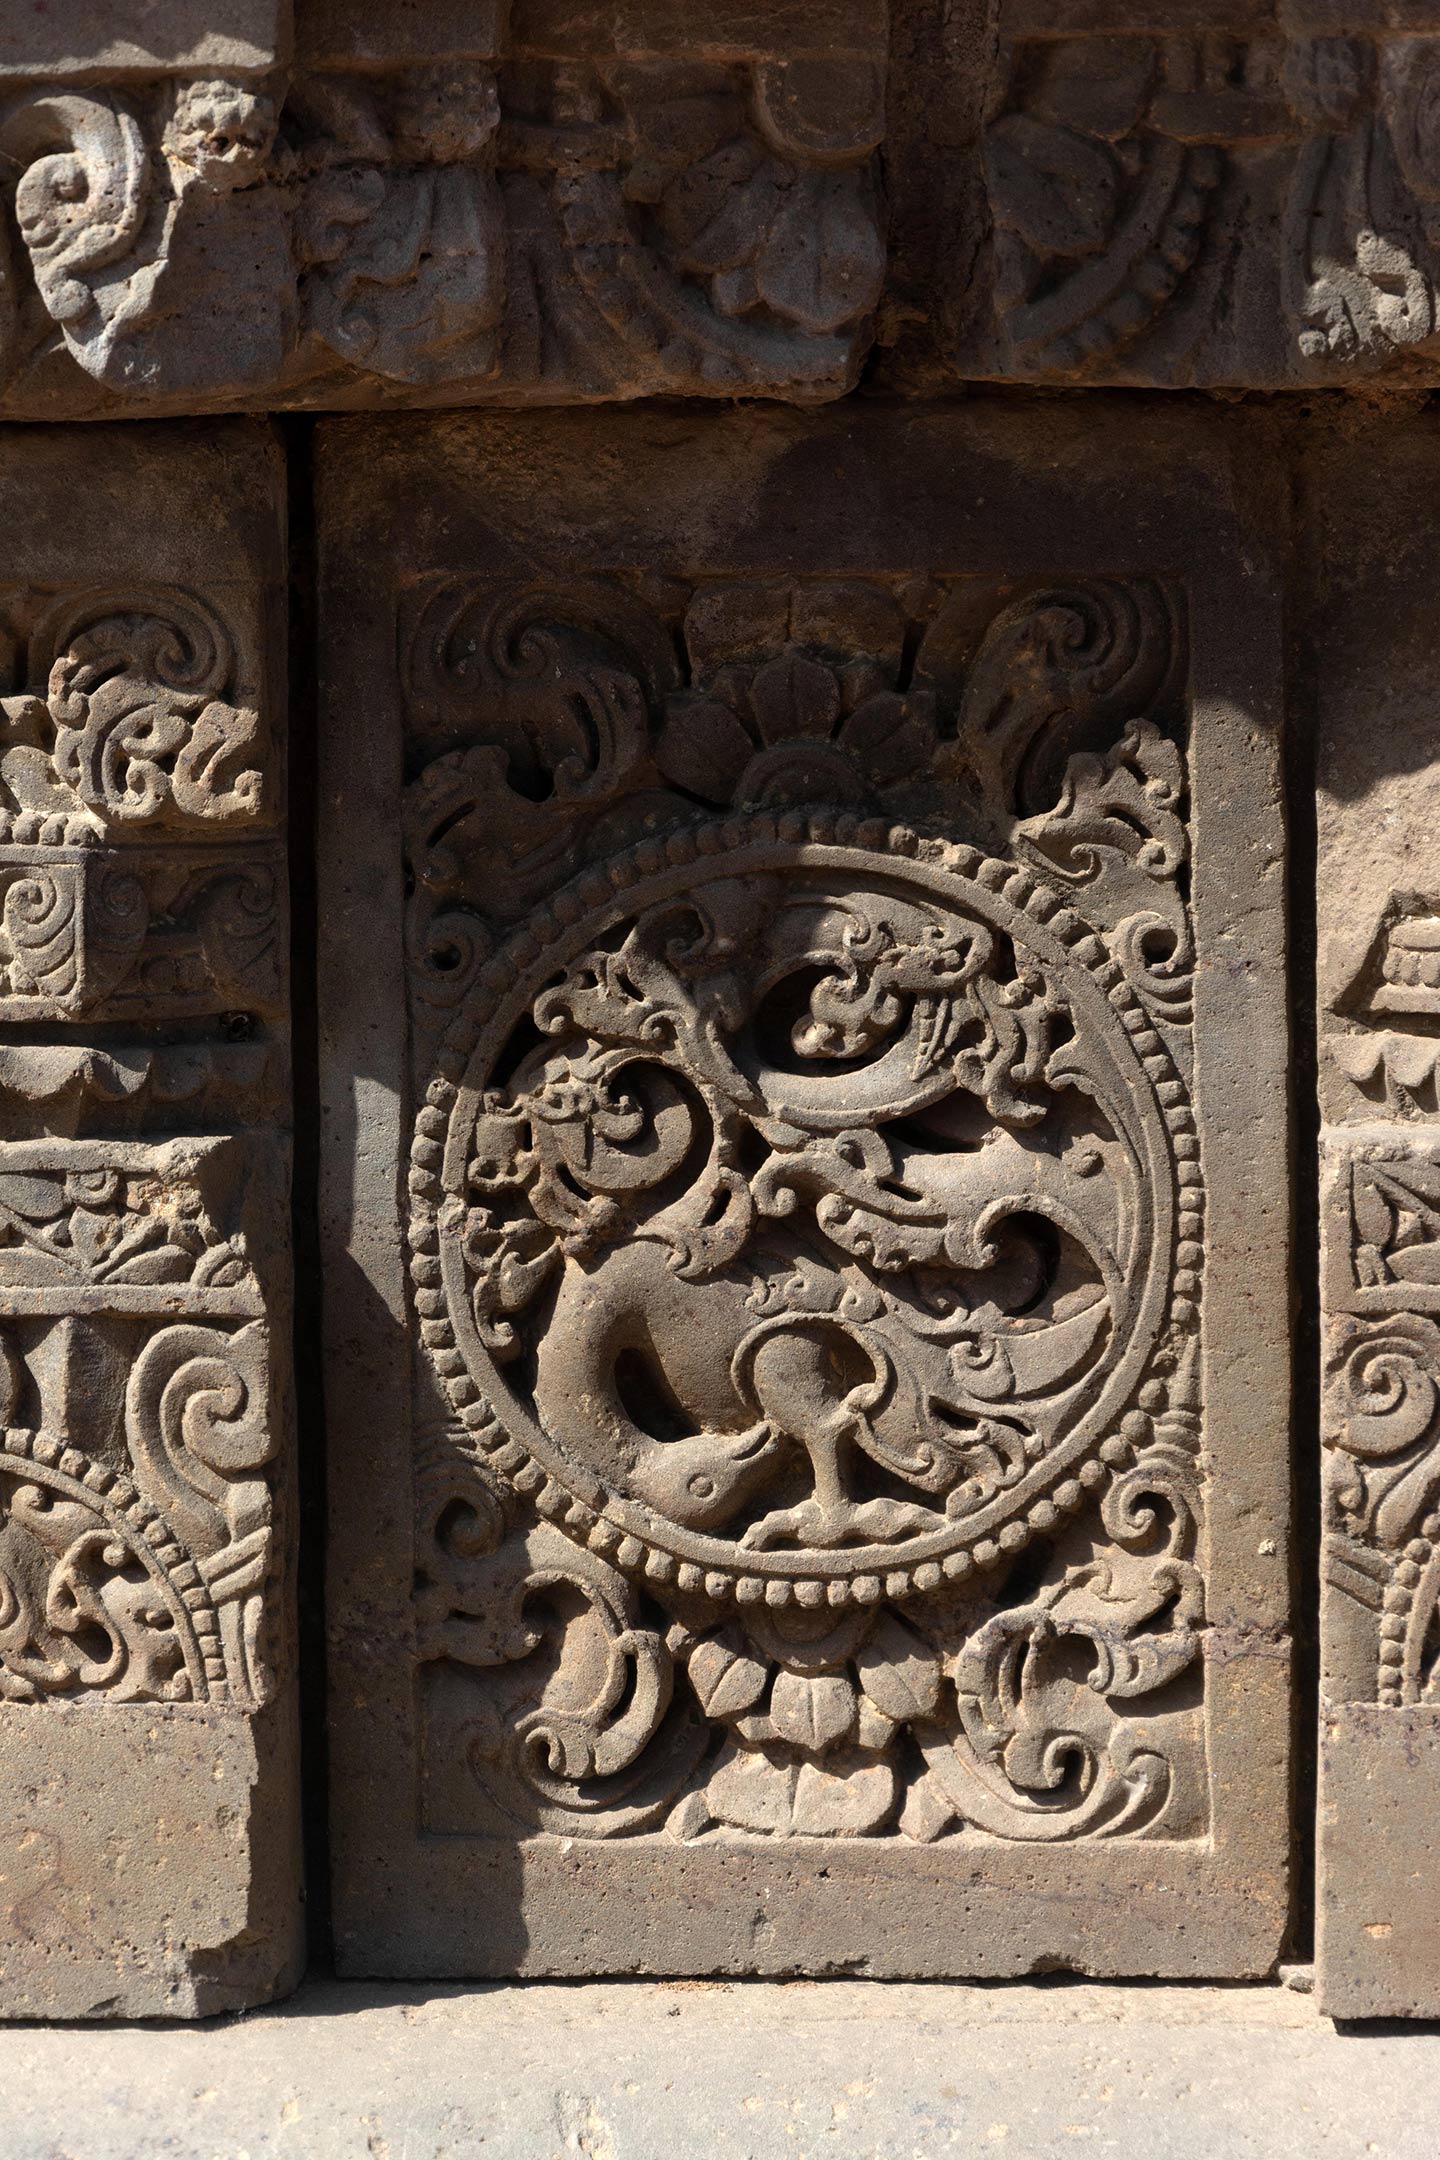 The central artwork of the plaque is in the form of a circular medallion surrounded by a foliage motif. In this medallion, a bird (likely a peacock) with its head bent downwards is integrated with a creeper motif. The rest of the plaque is covered with ardha padma (half lotus) and kalpa lata (creeper) motifs.